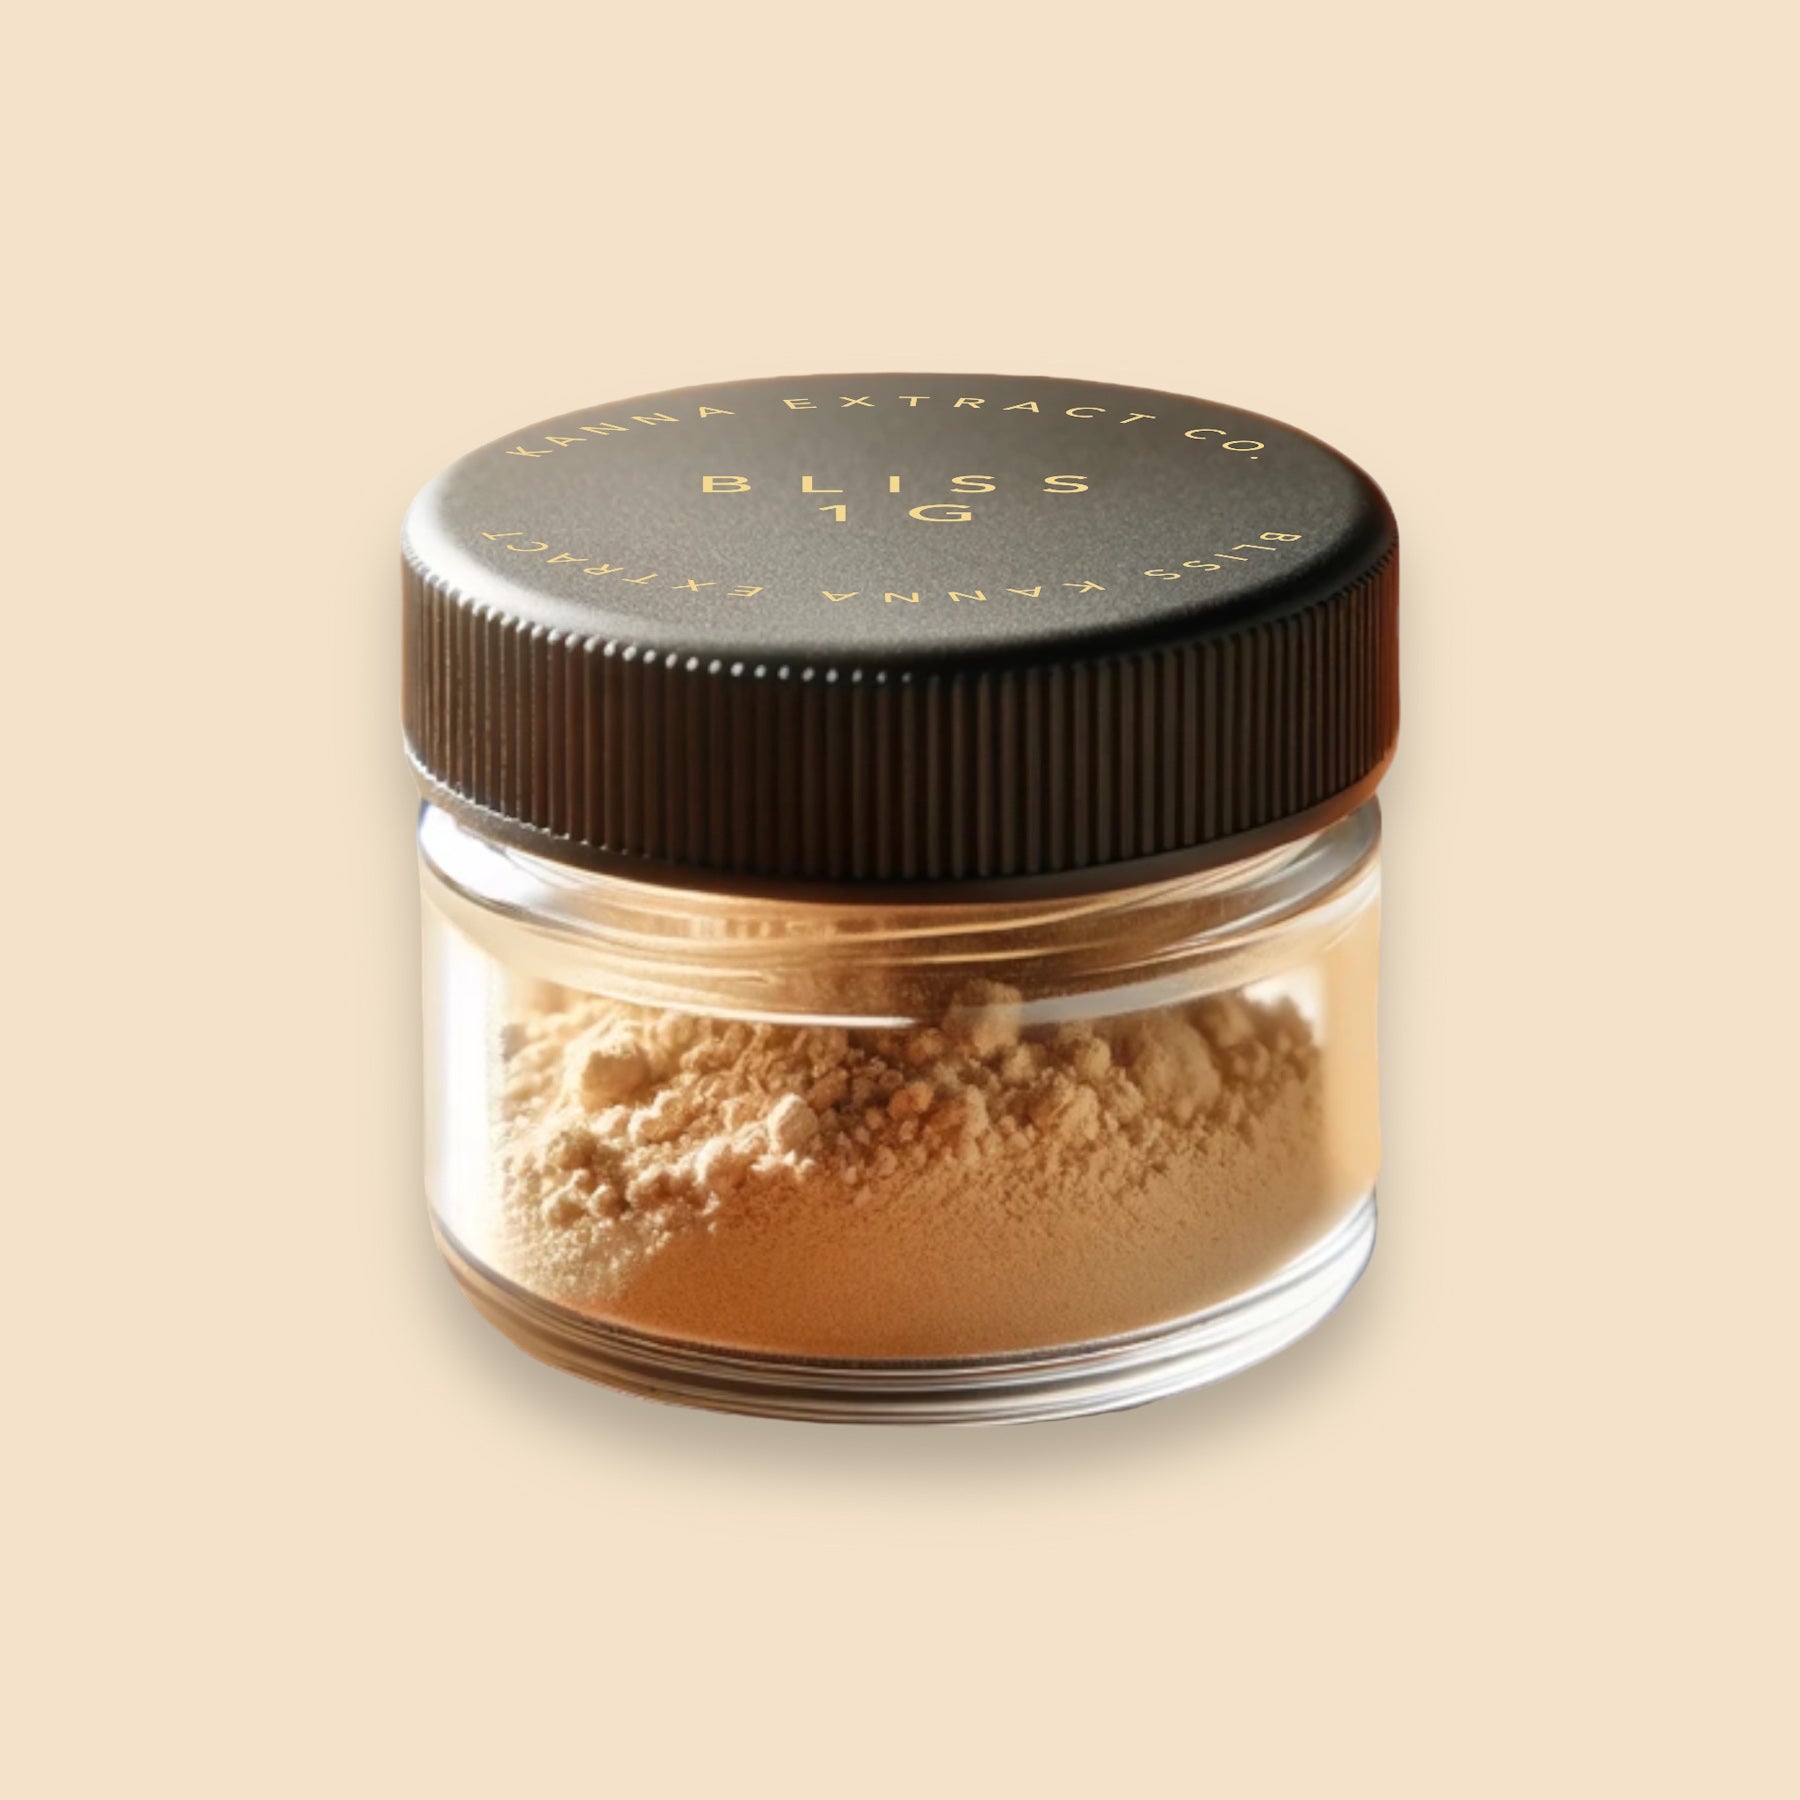 Kanna Extract Co retail packaging for Bliss kanna extract powder made from organic sceletium tortuosum made in South Africa from highly alkaloid DV17 for bulk kanna wholesale supply and distribution